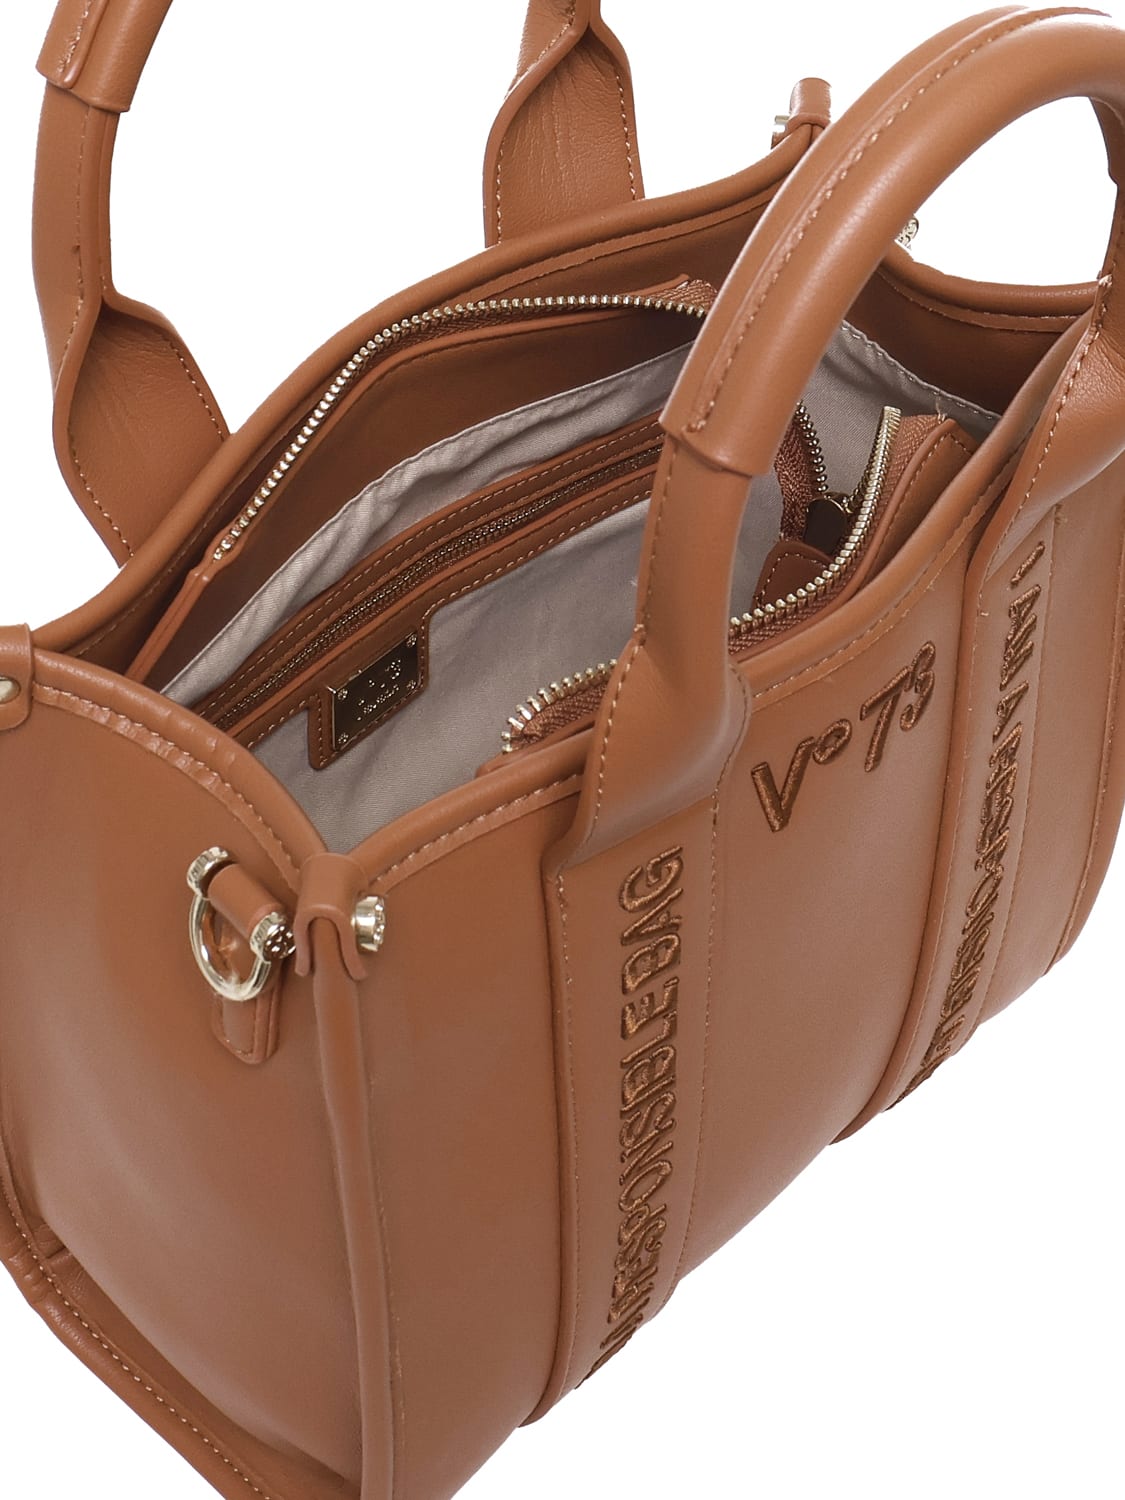 Shop V73 Echo 73 Shopping Bag In Leather Brown